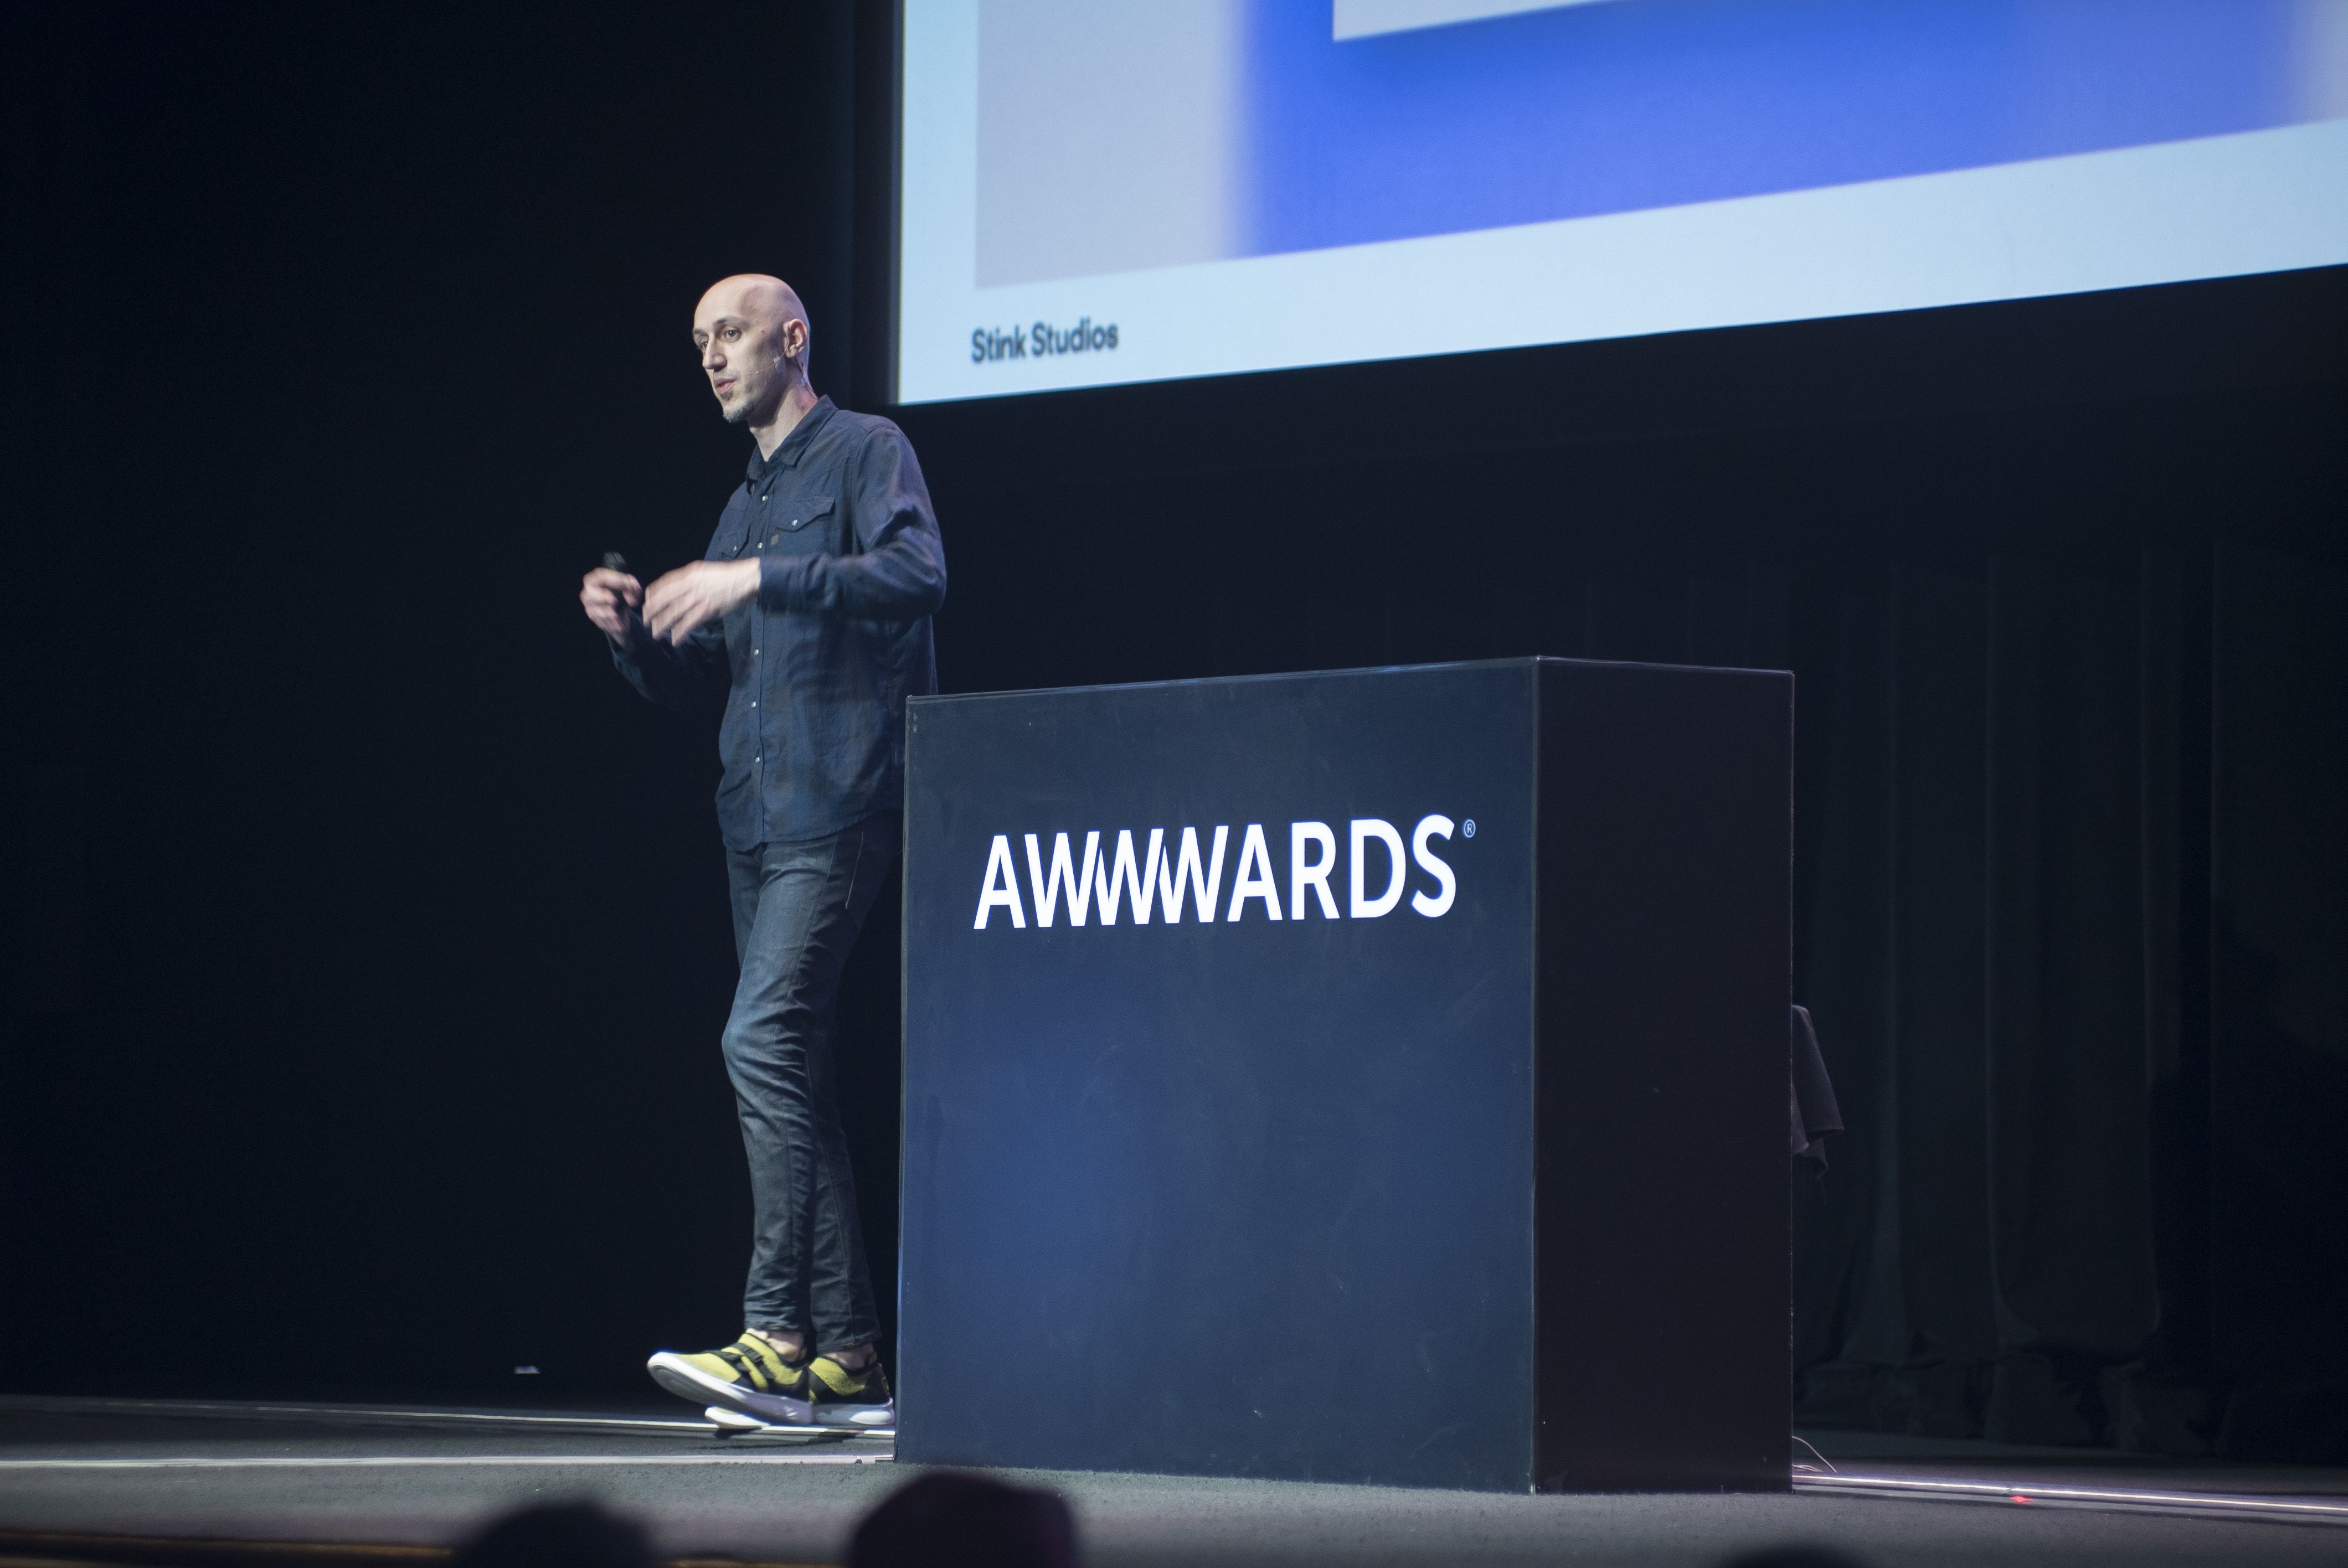 David Navarro giving a talk last year at the Awwwards Conference in Los Angeles